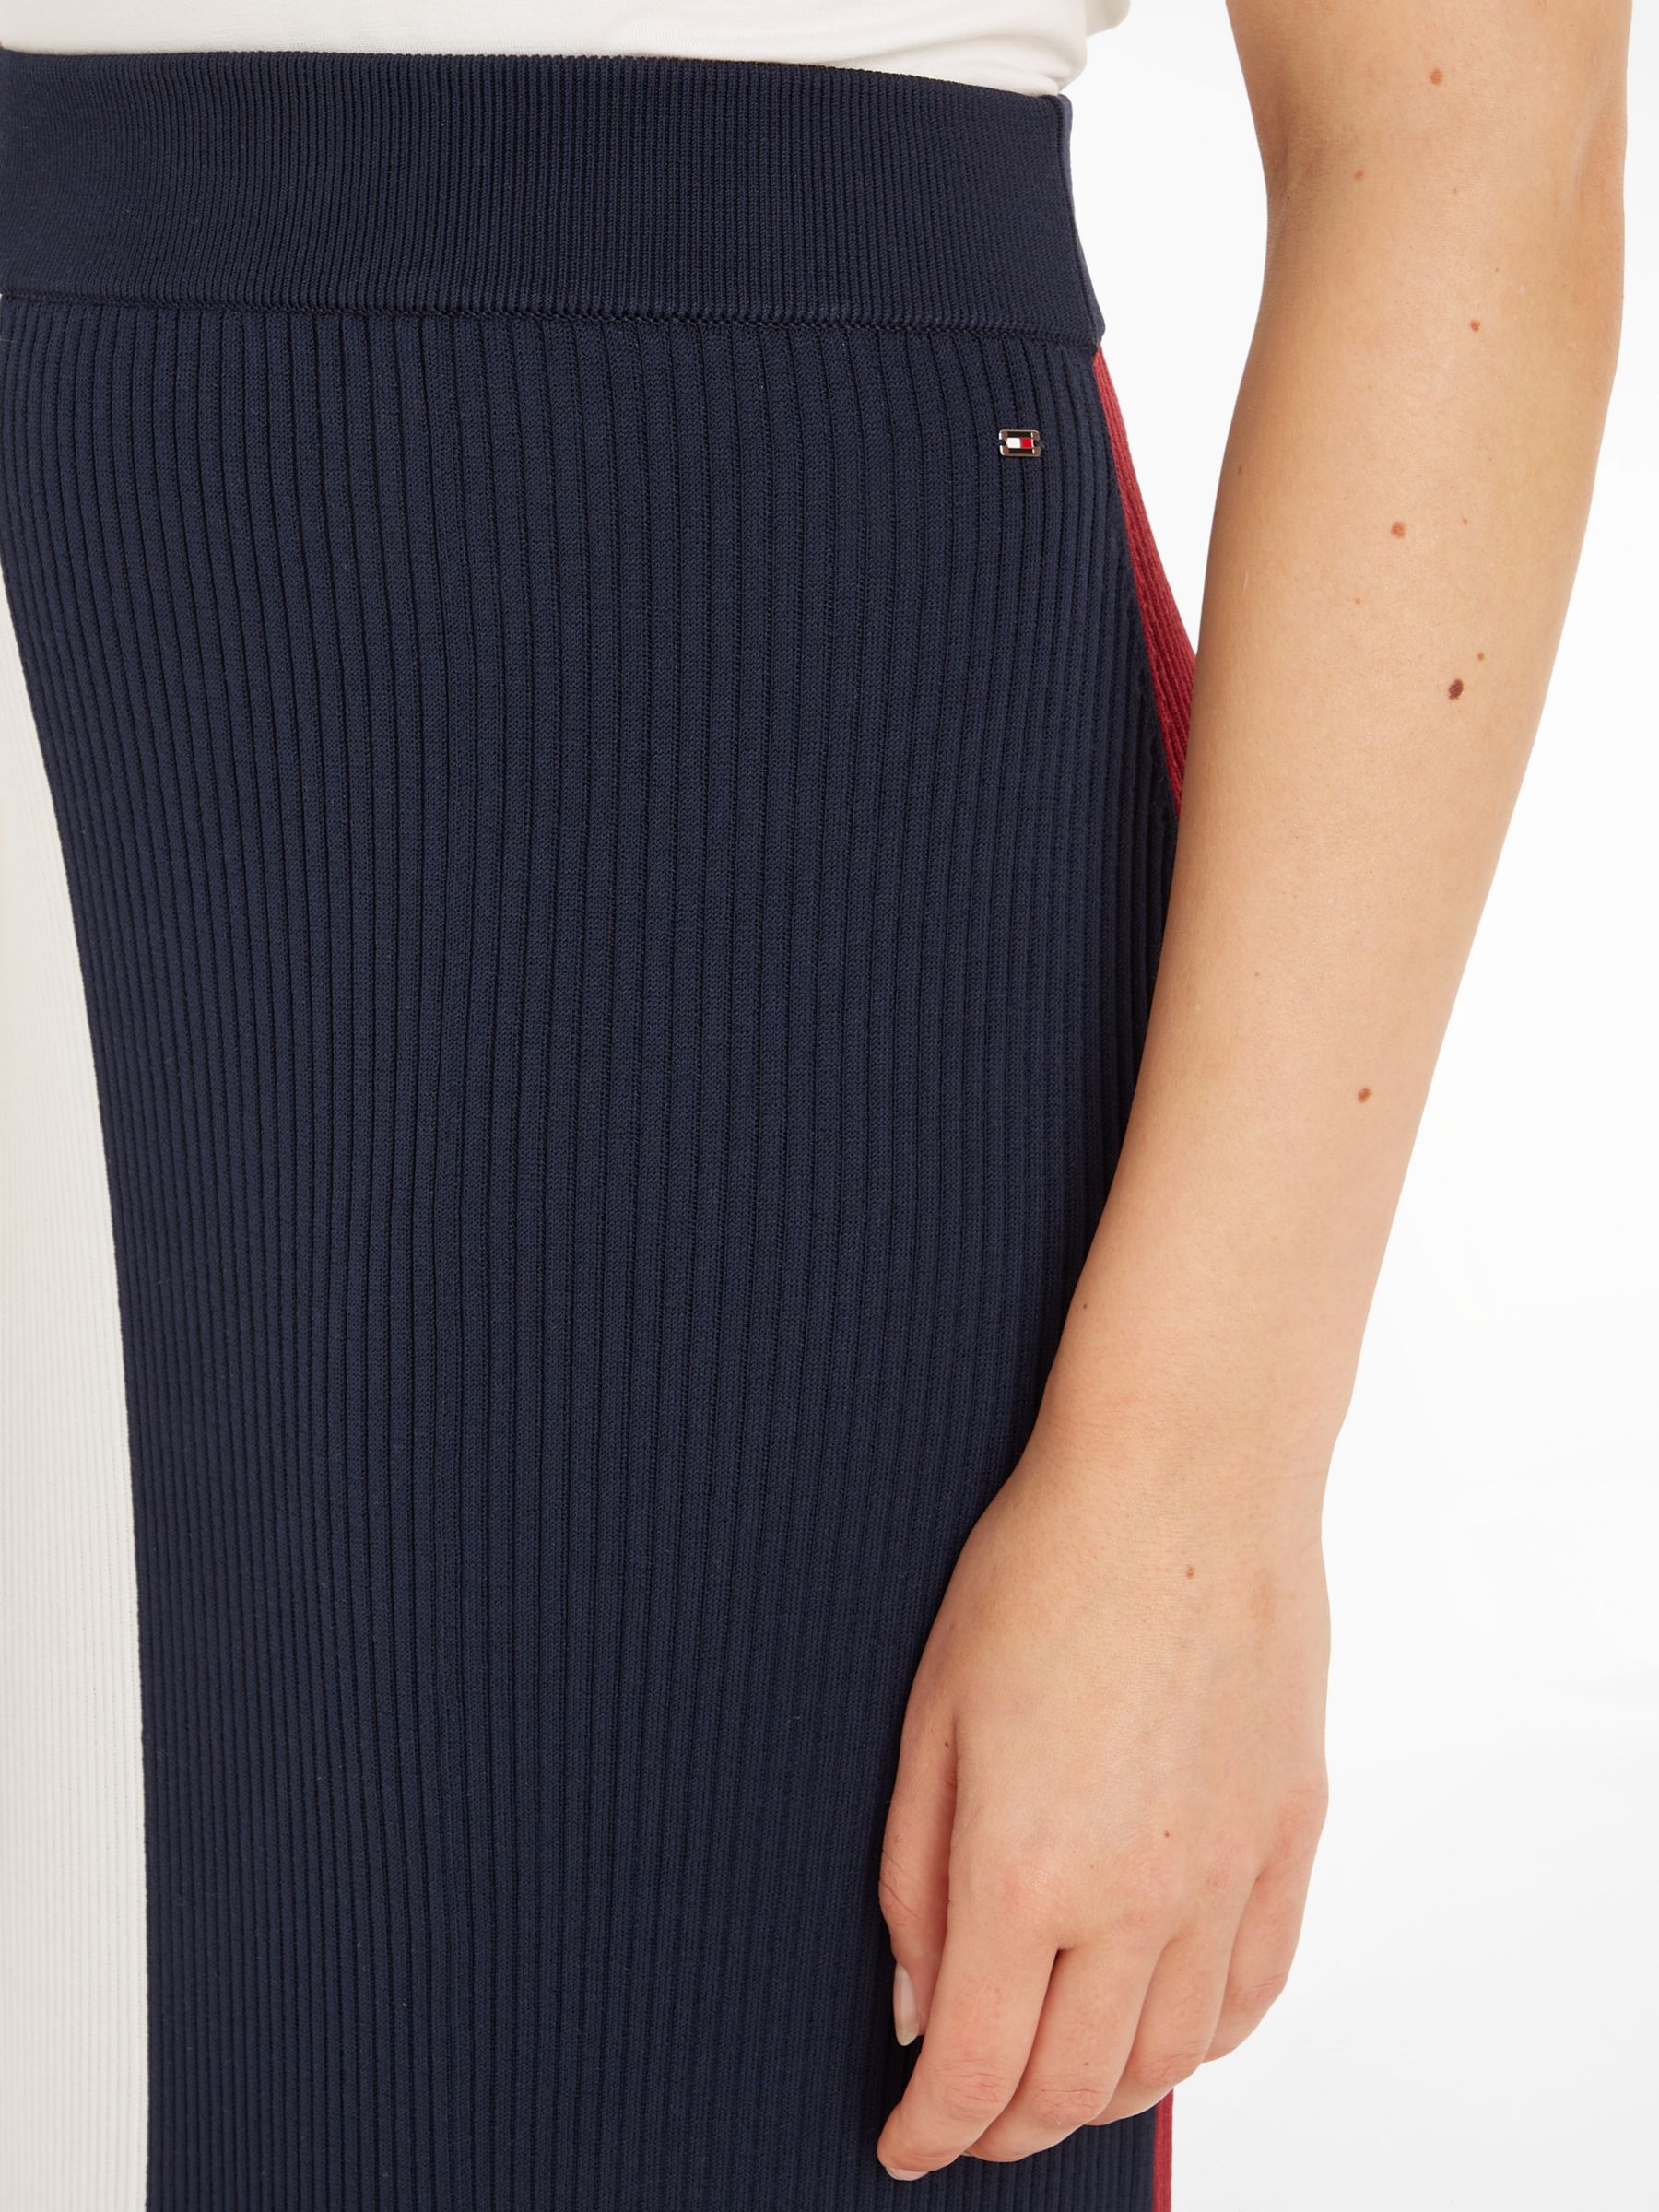 Buy Tommy Hilfiger Colour Block Ribbed Maxi Skirt, Navy/Multi Online at johnlewis.com